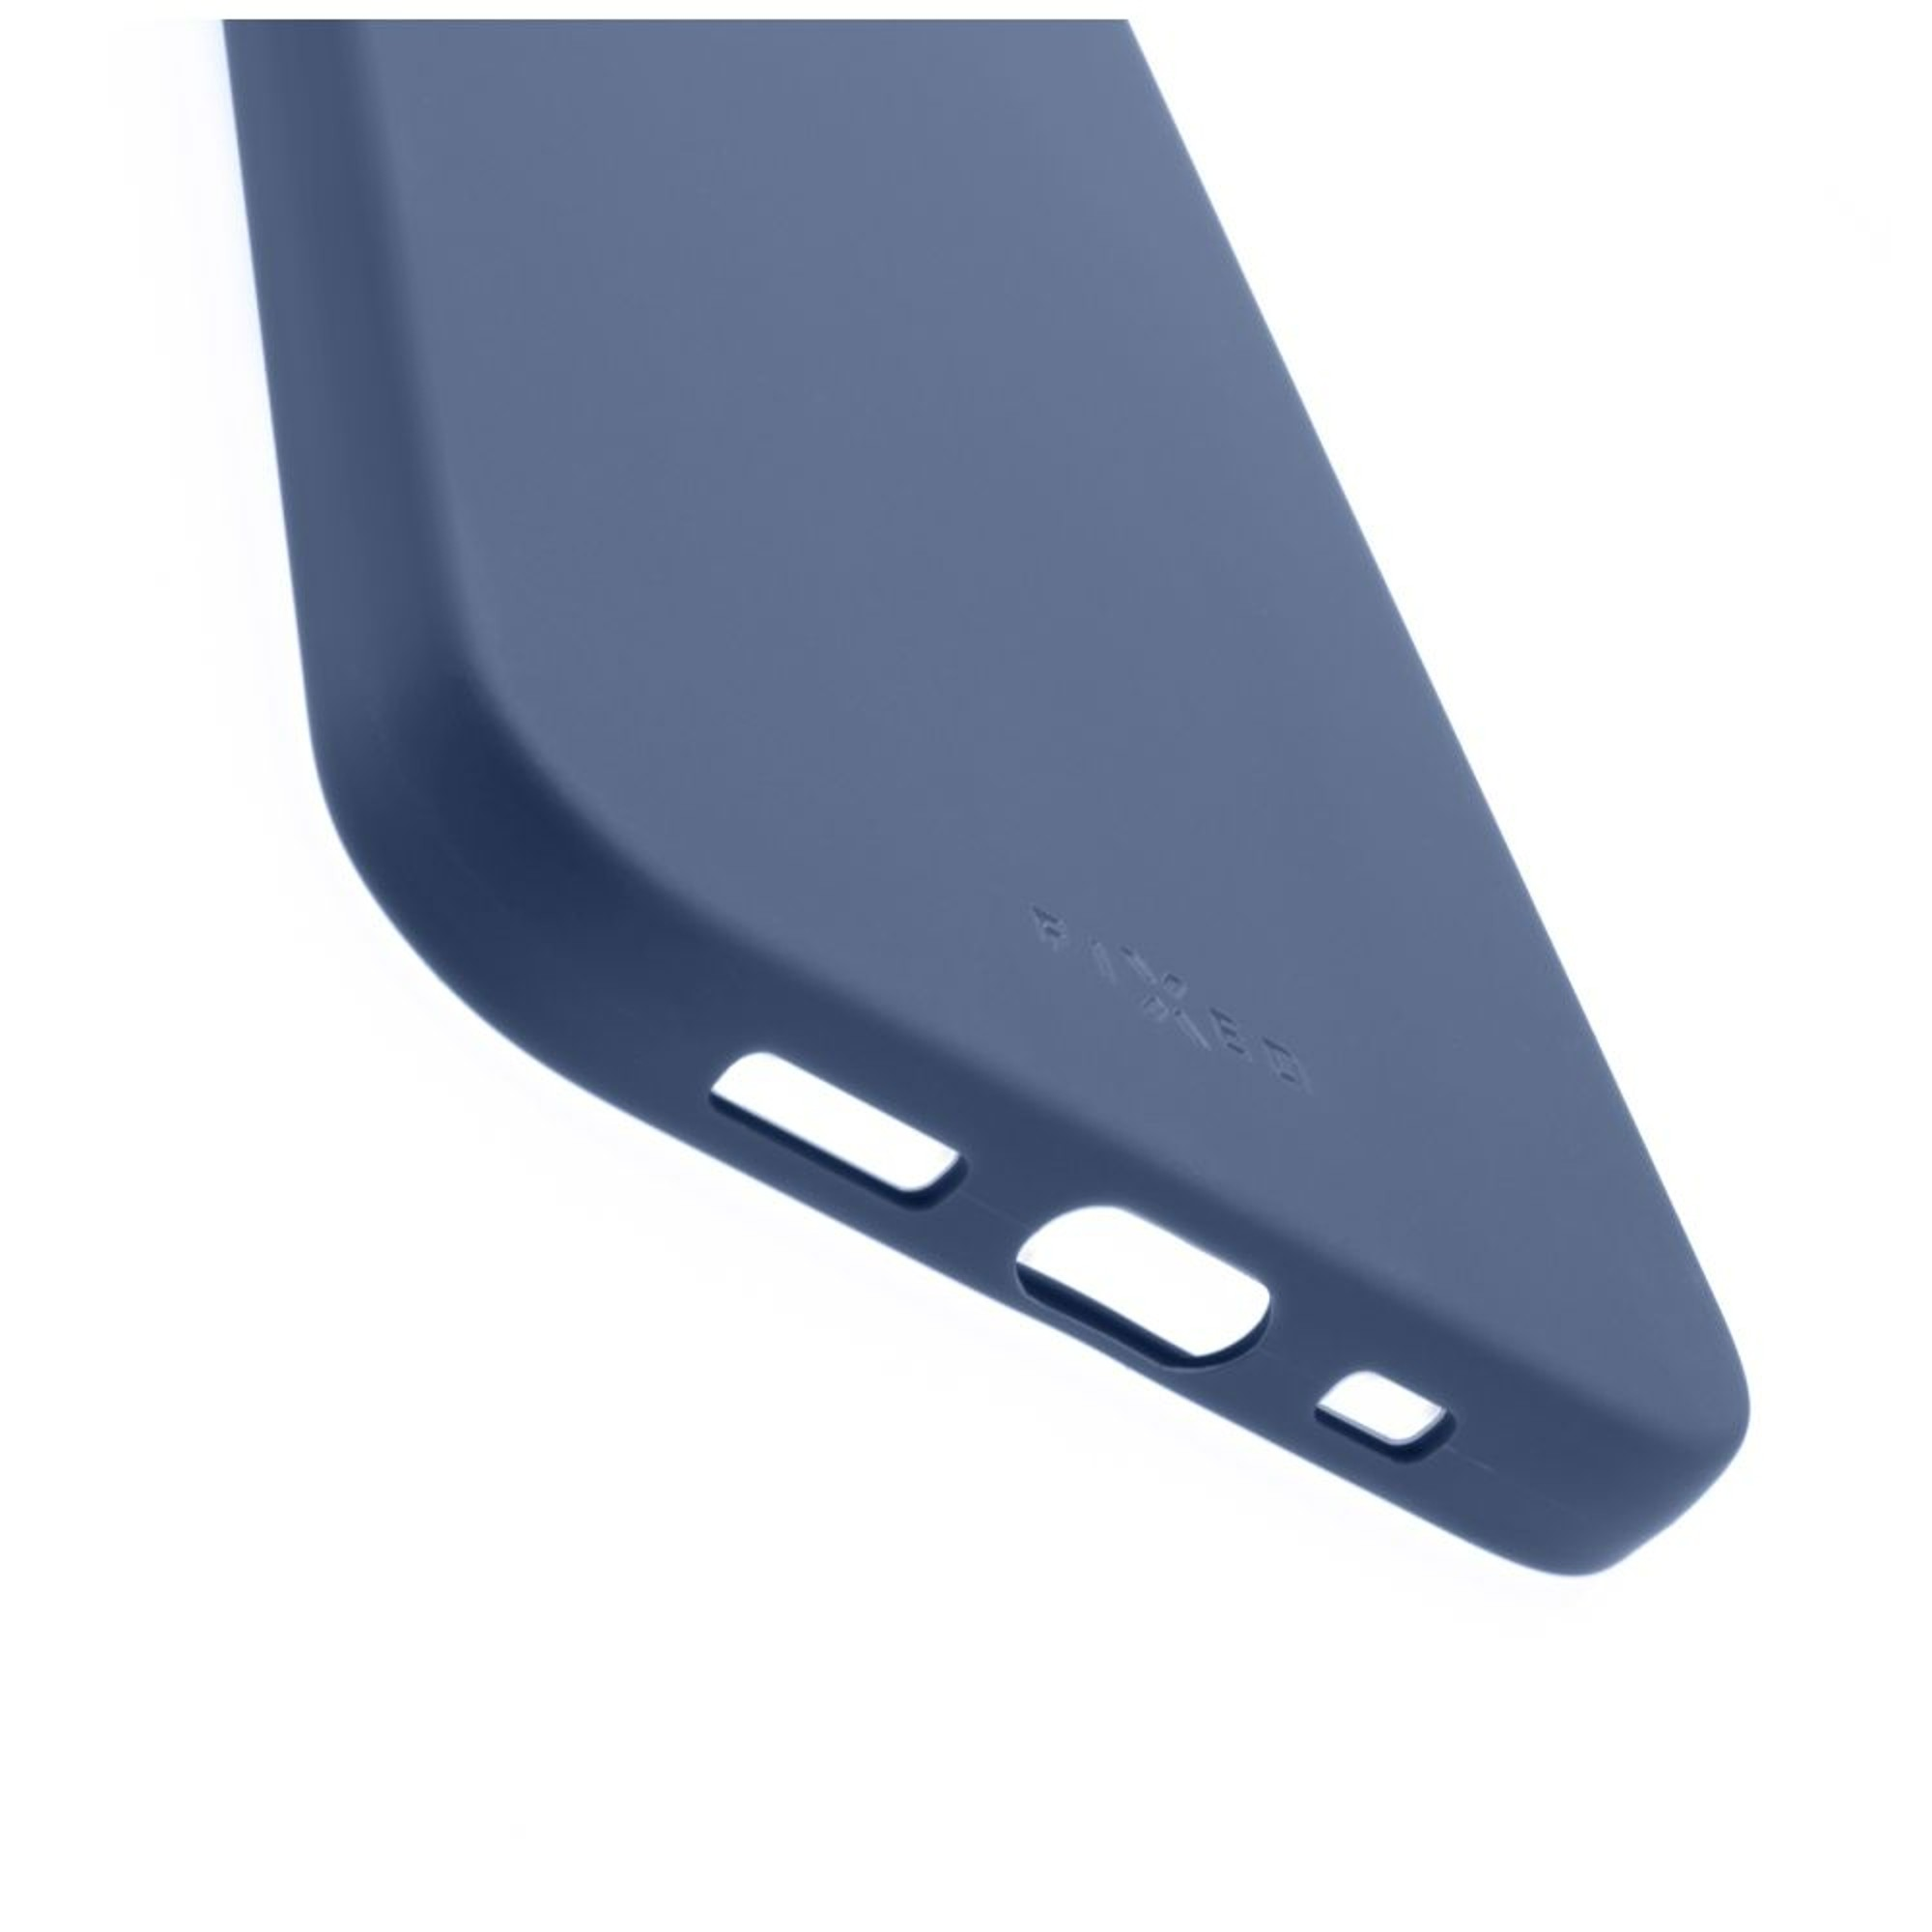 FIXED FIXST-1203-BL, 15 Pro Apple, iPhone Backcover, Blau Max